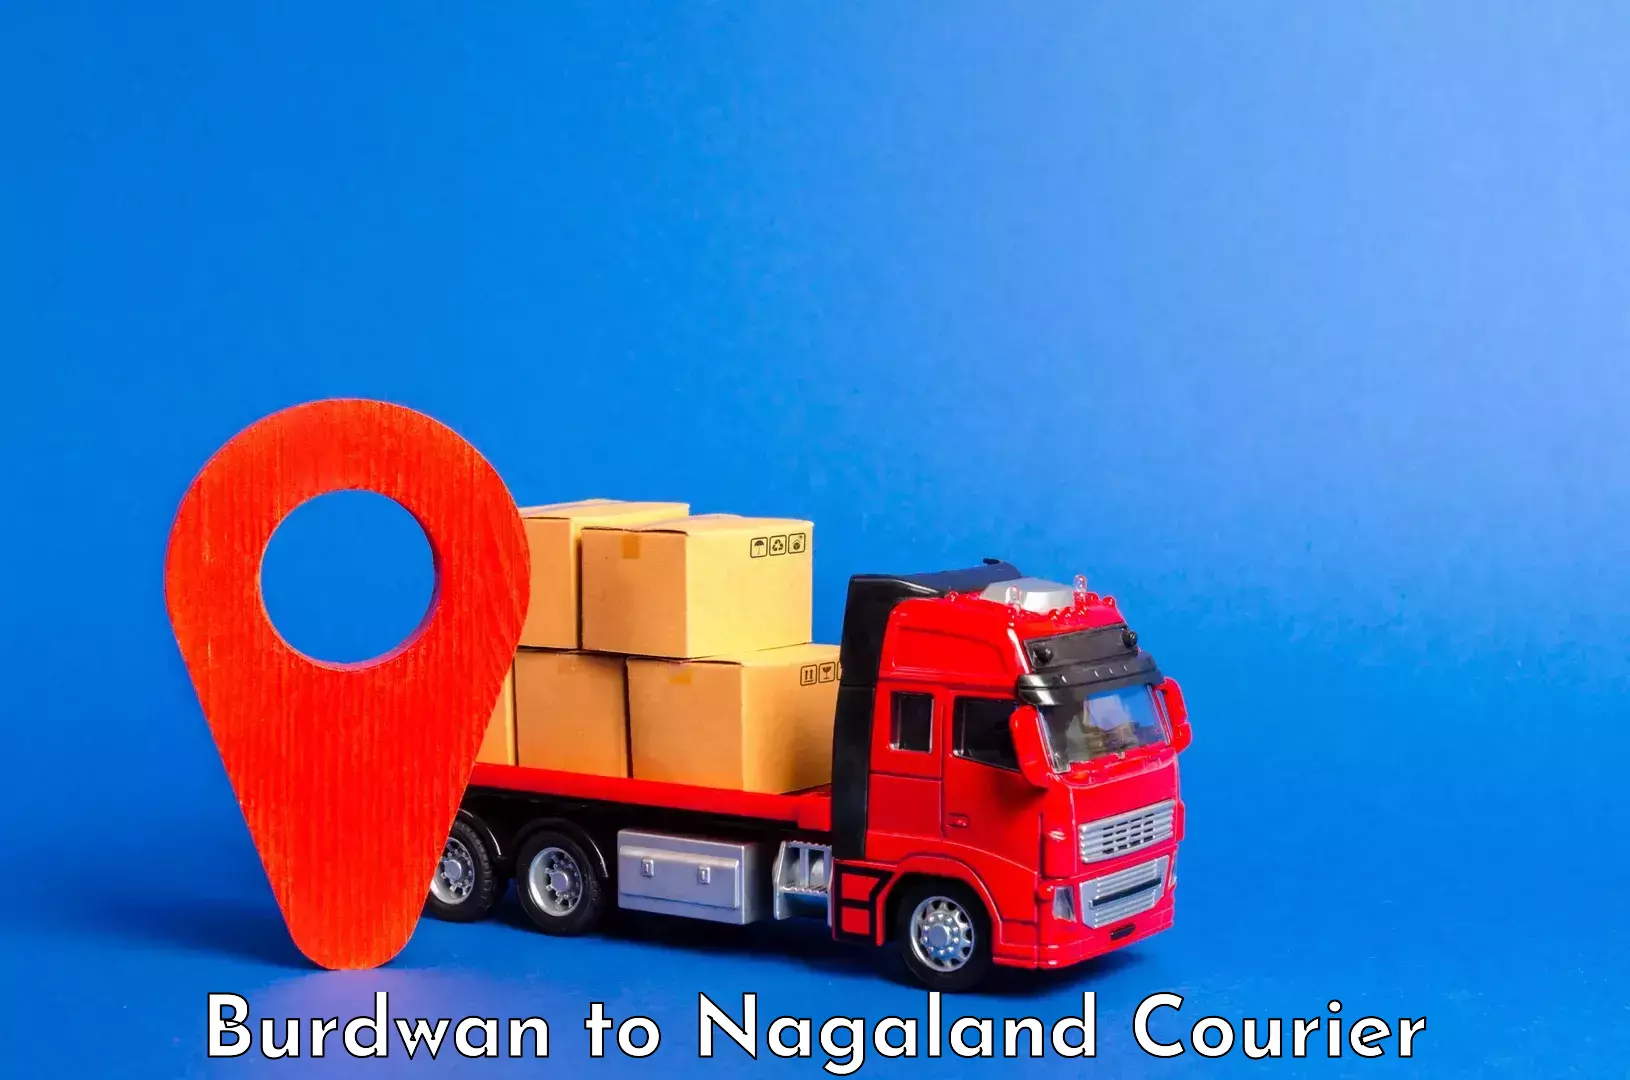 Luggage delivery network Burdwan to Nagaland